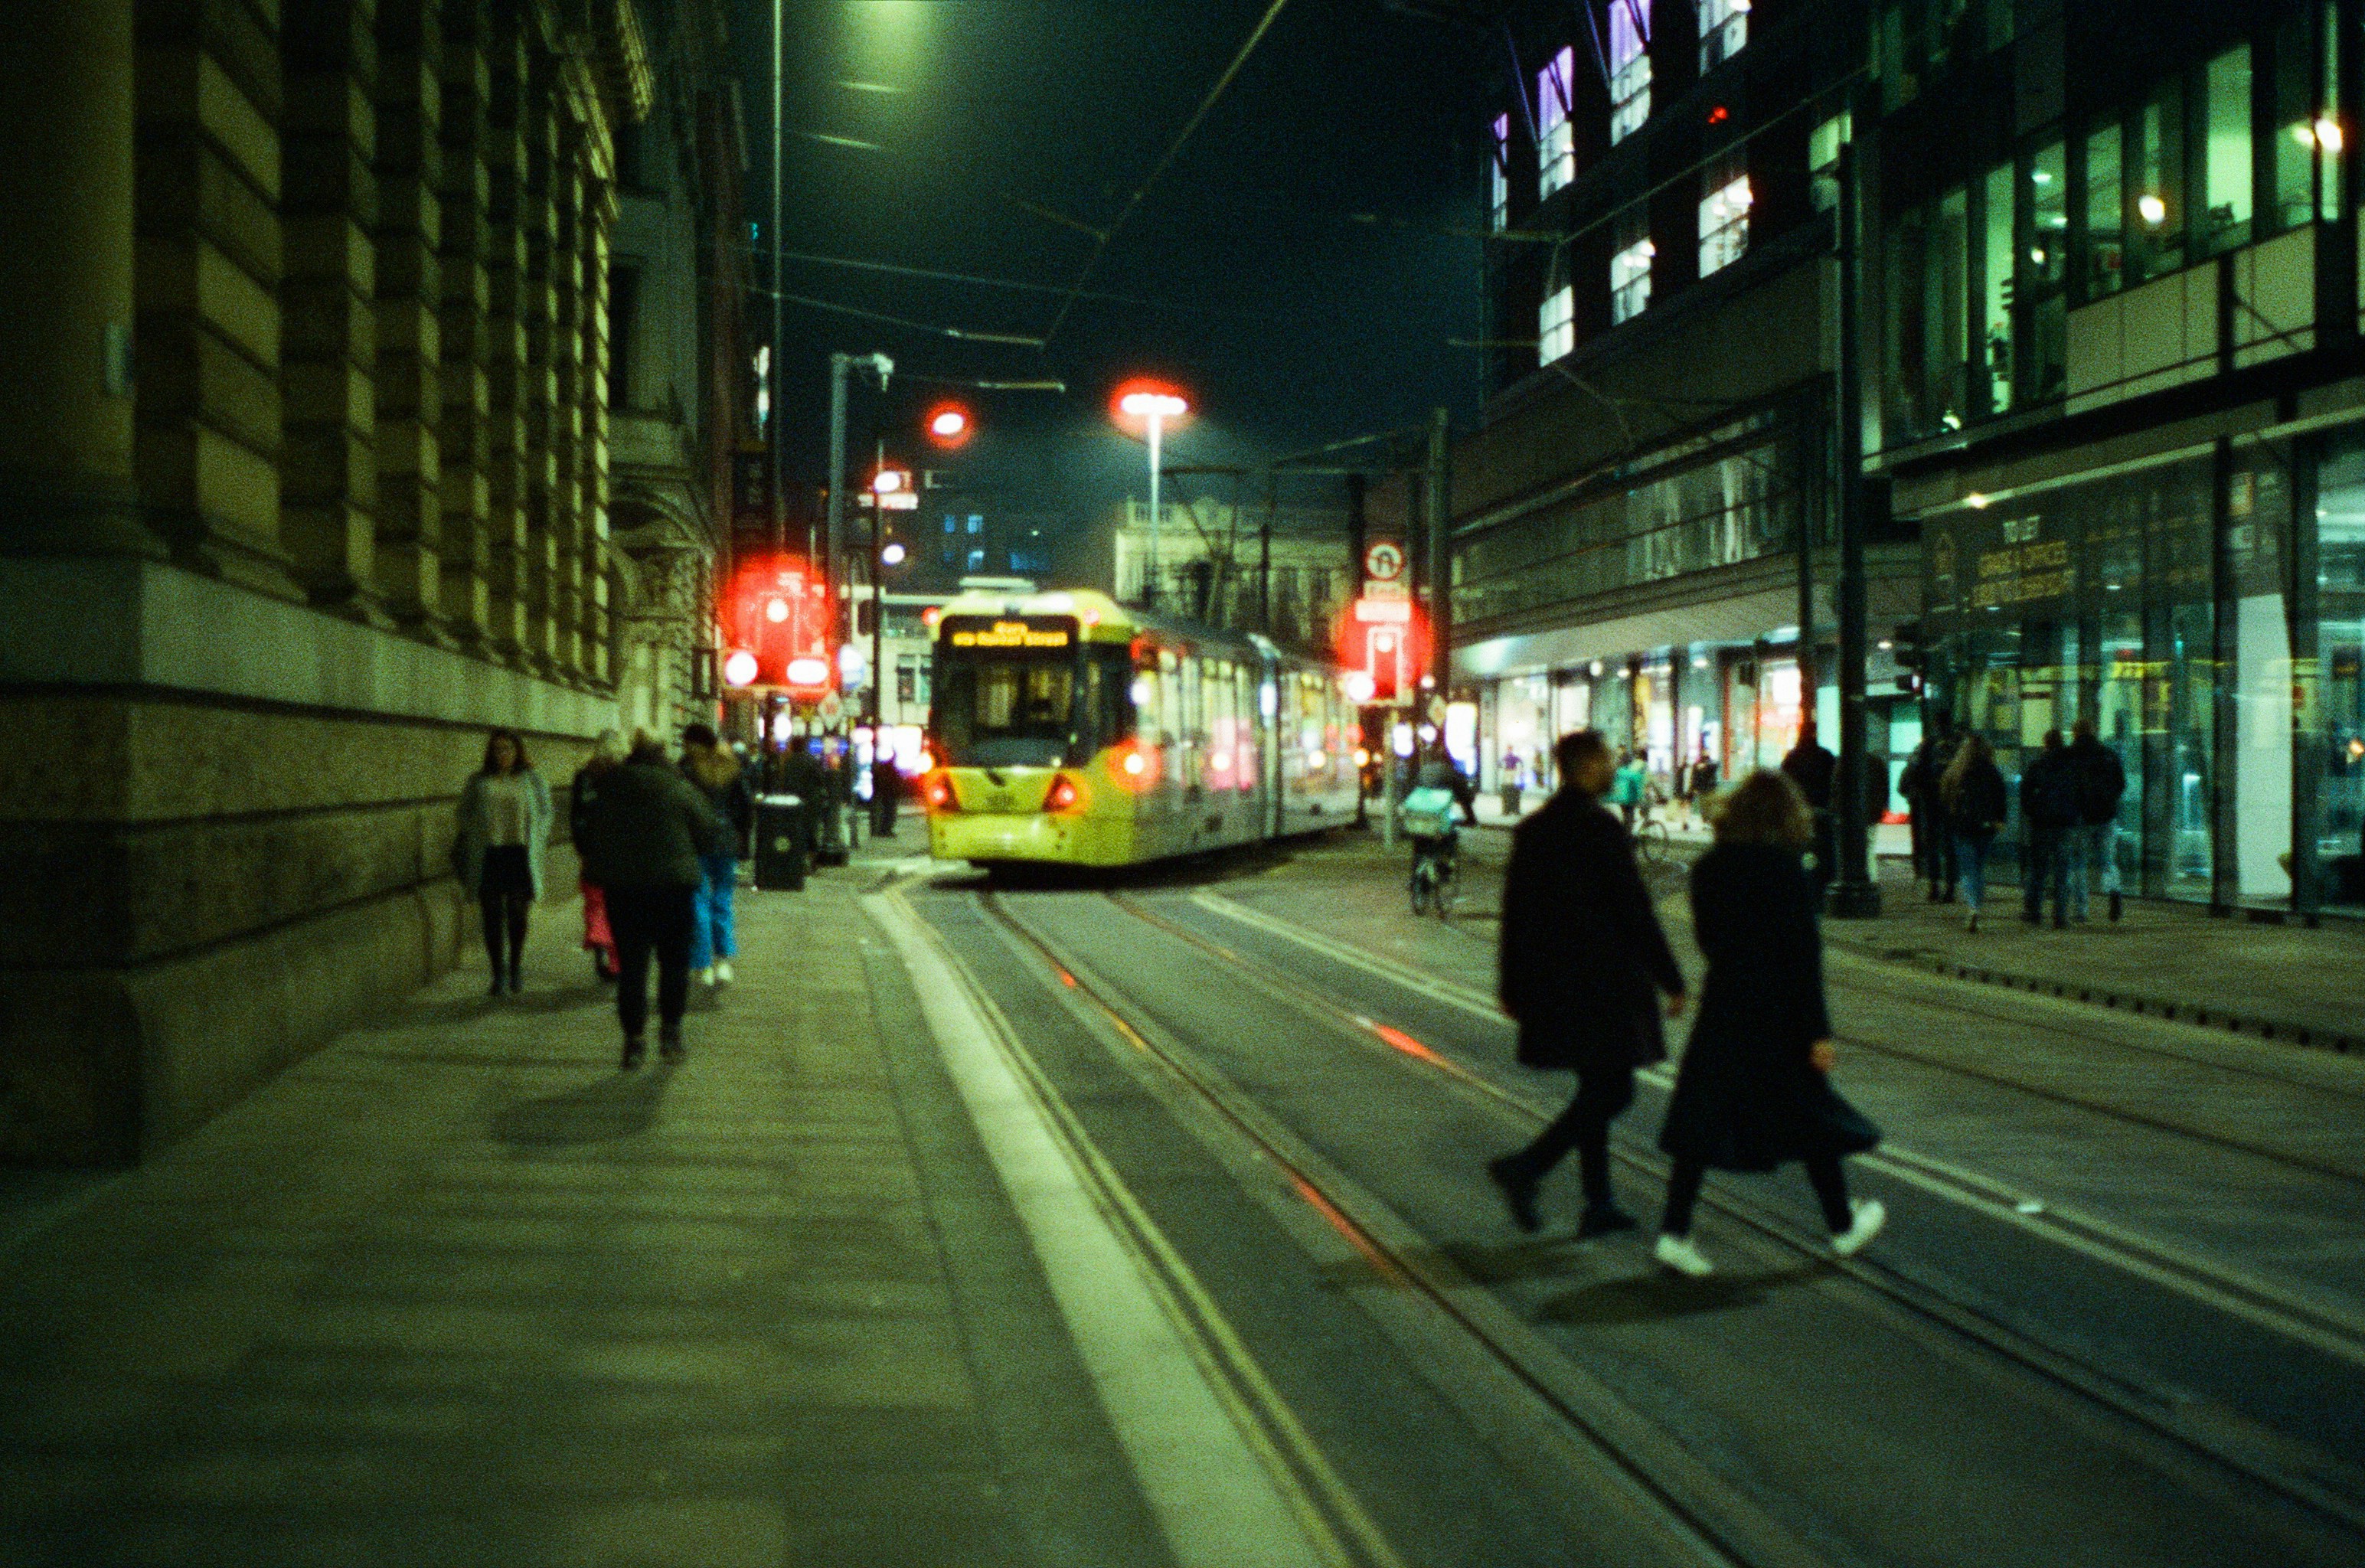 Street photograph taken in Manchester at night.